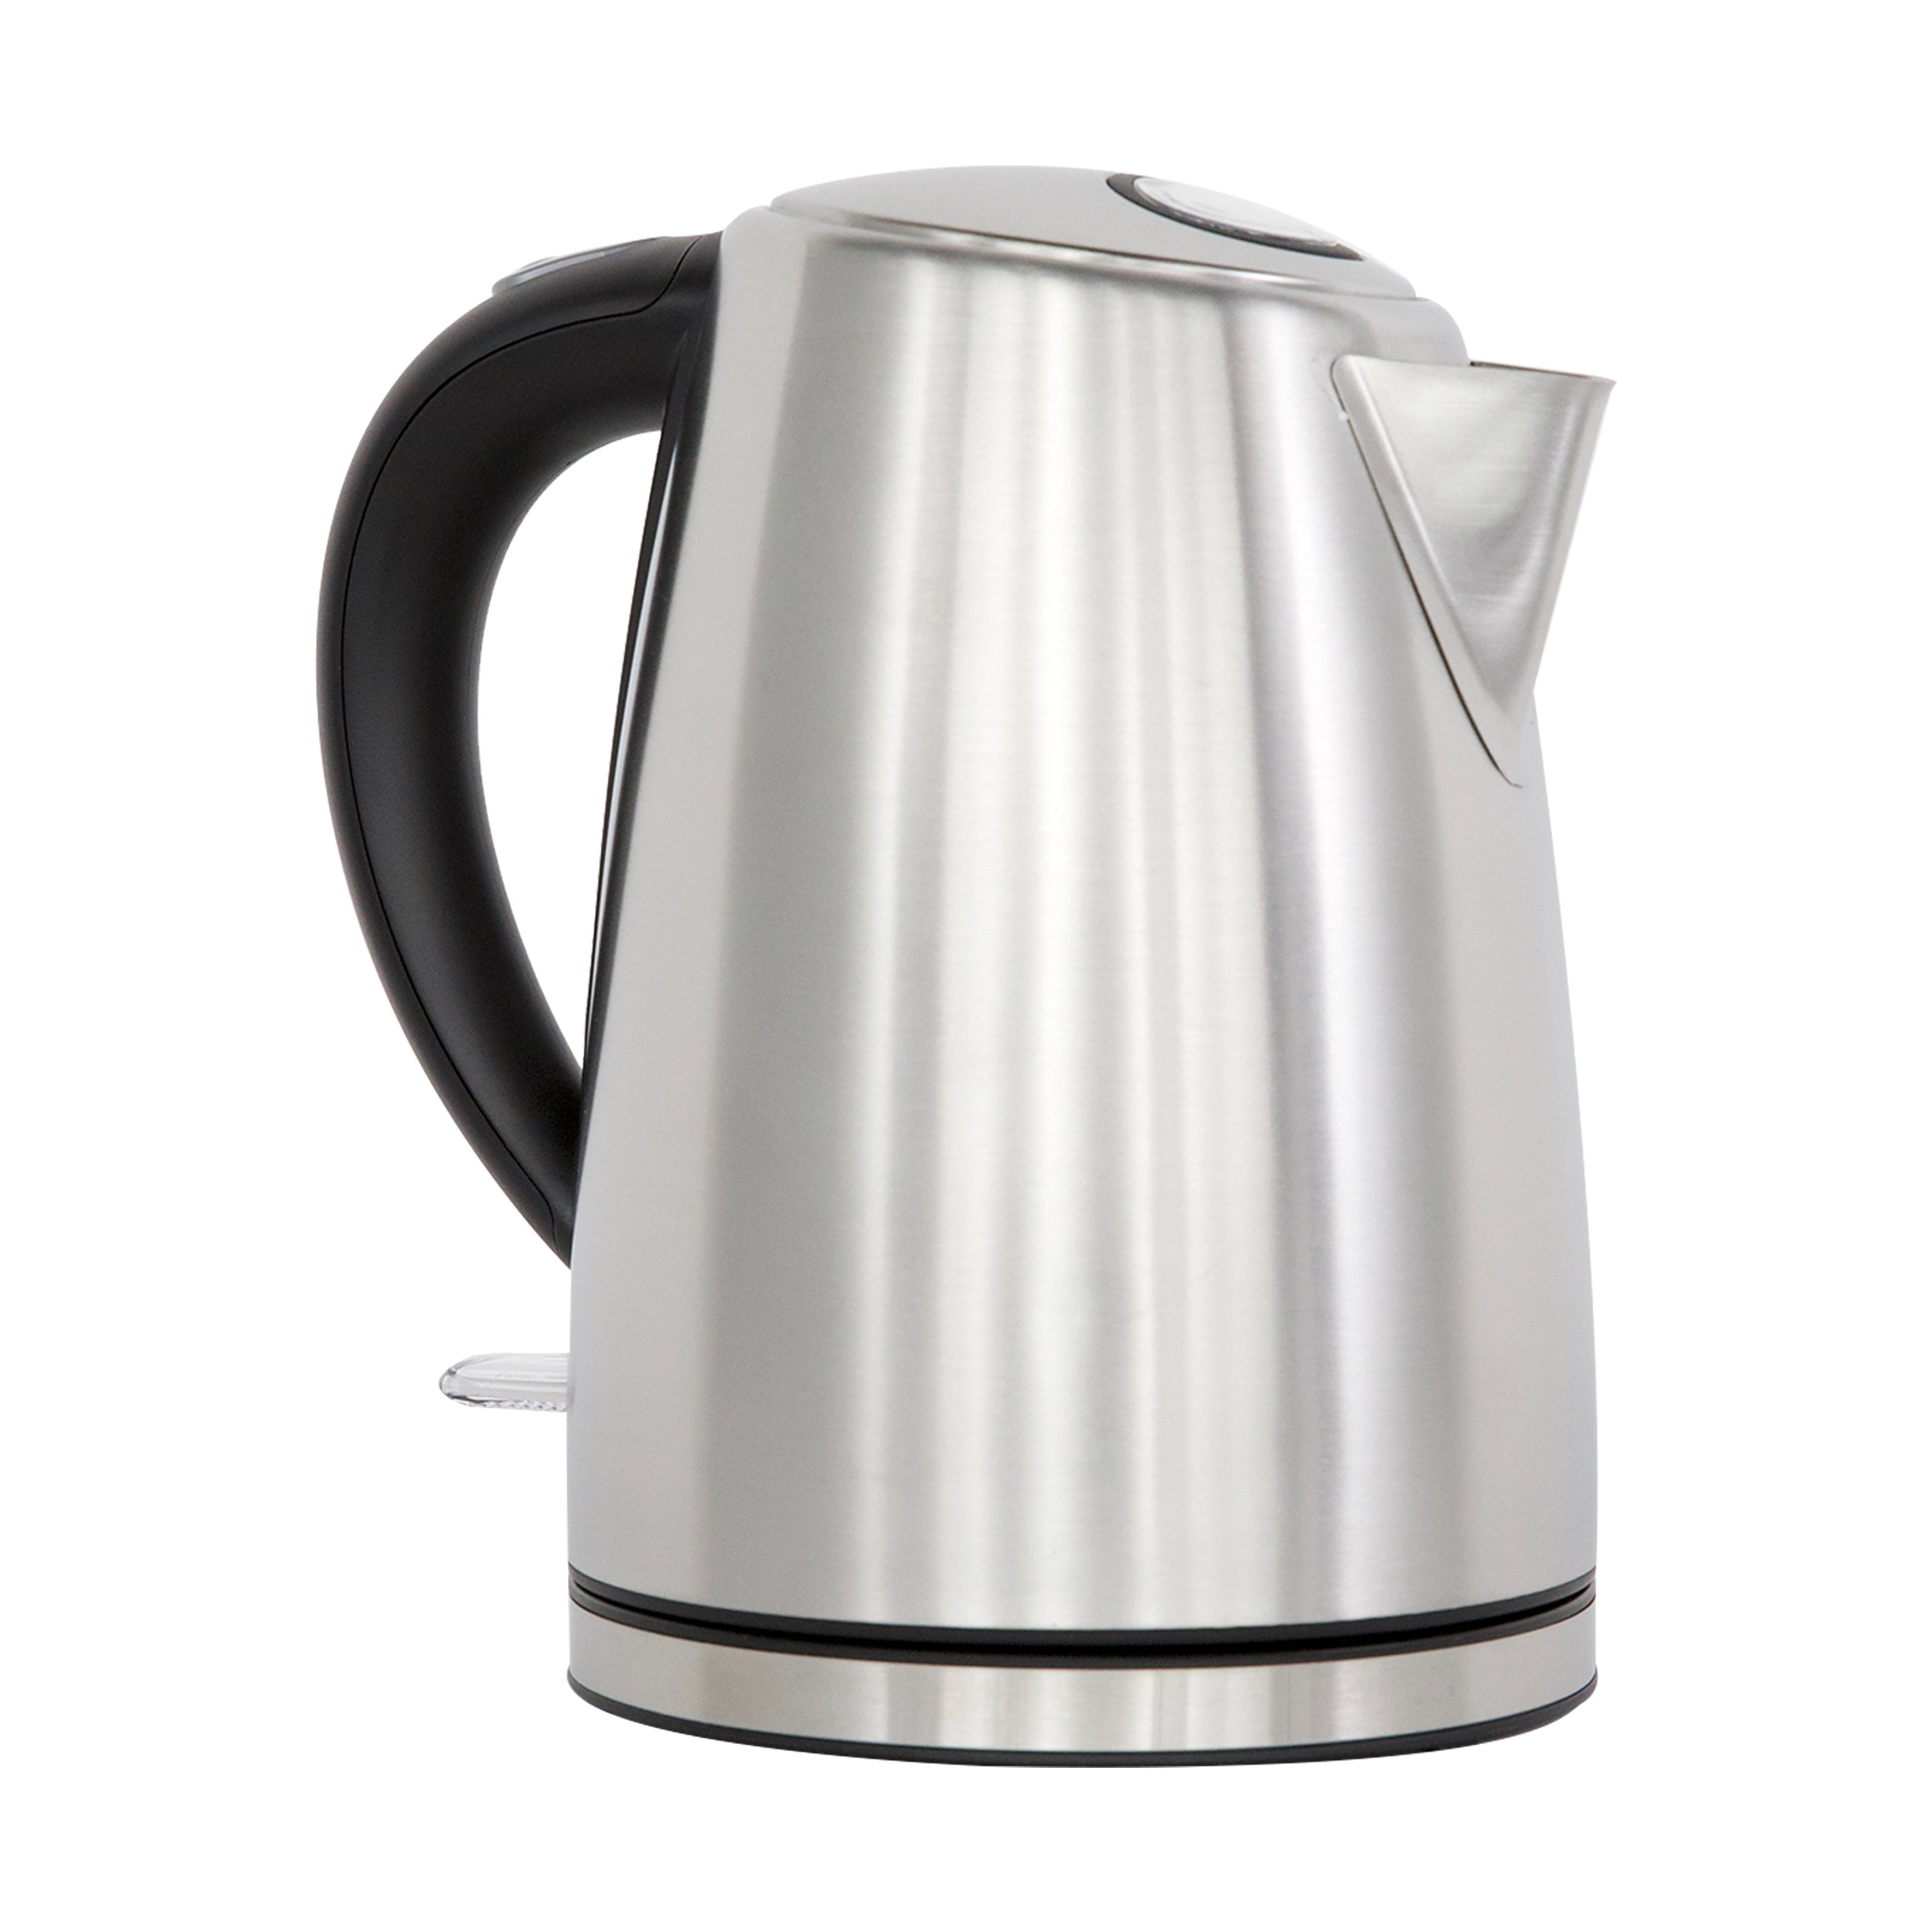 Easily prepare boiling water in minutes with the Chef'sChoice Cordless  Compact Electric Kettle. This lightweight, compact tea kettle features a  one-quart capacity. It's perfect for preparing boiling water for tea,  coffee, hot